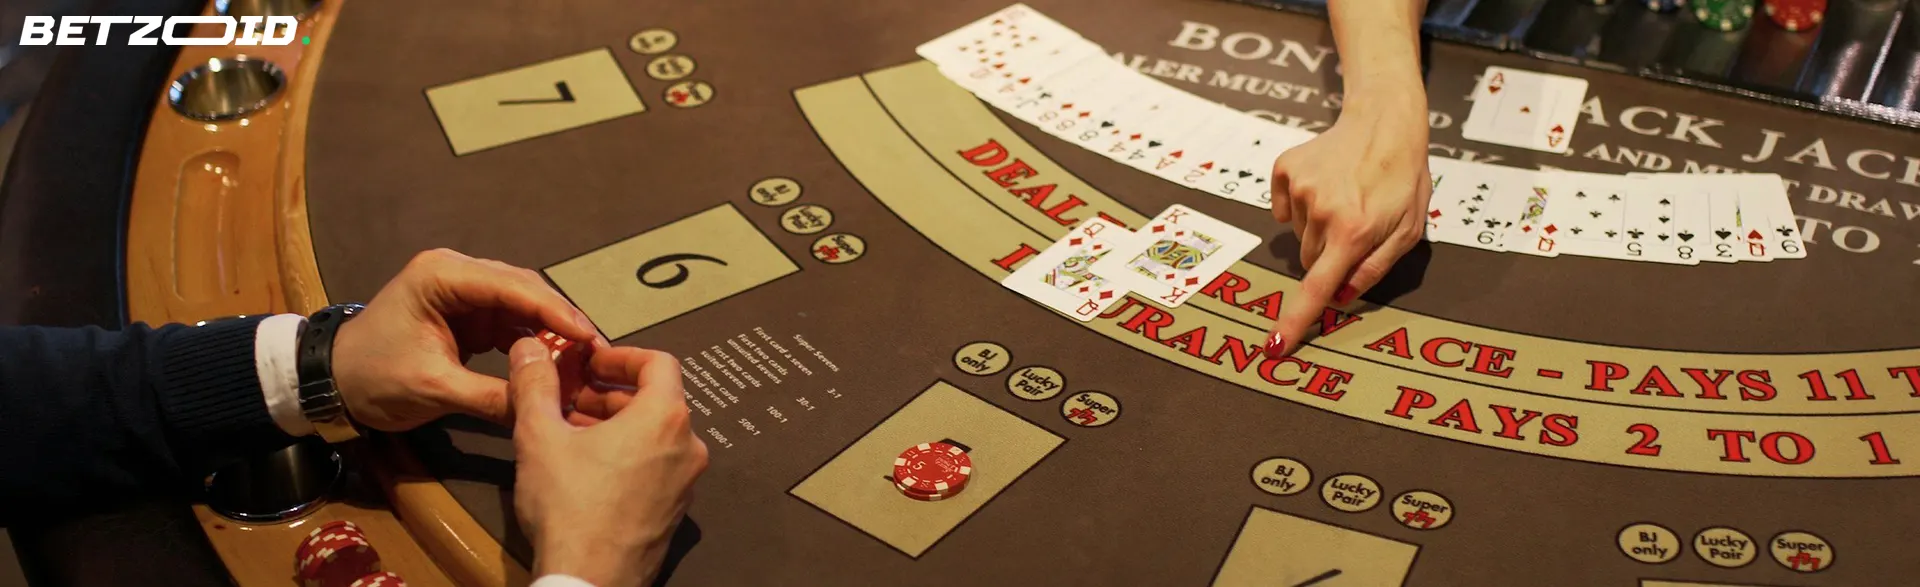 A close-up view of a blackjack table with a dealer's hand distributing cards, highlighting the excitement and strategy involved at the best bonus online casinos in Canada.